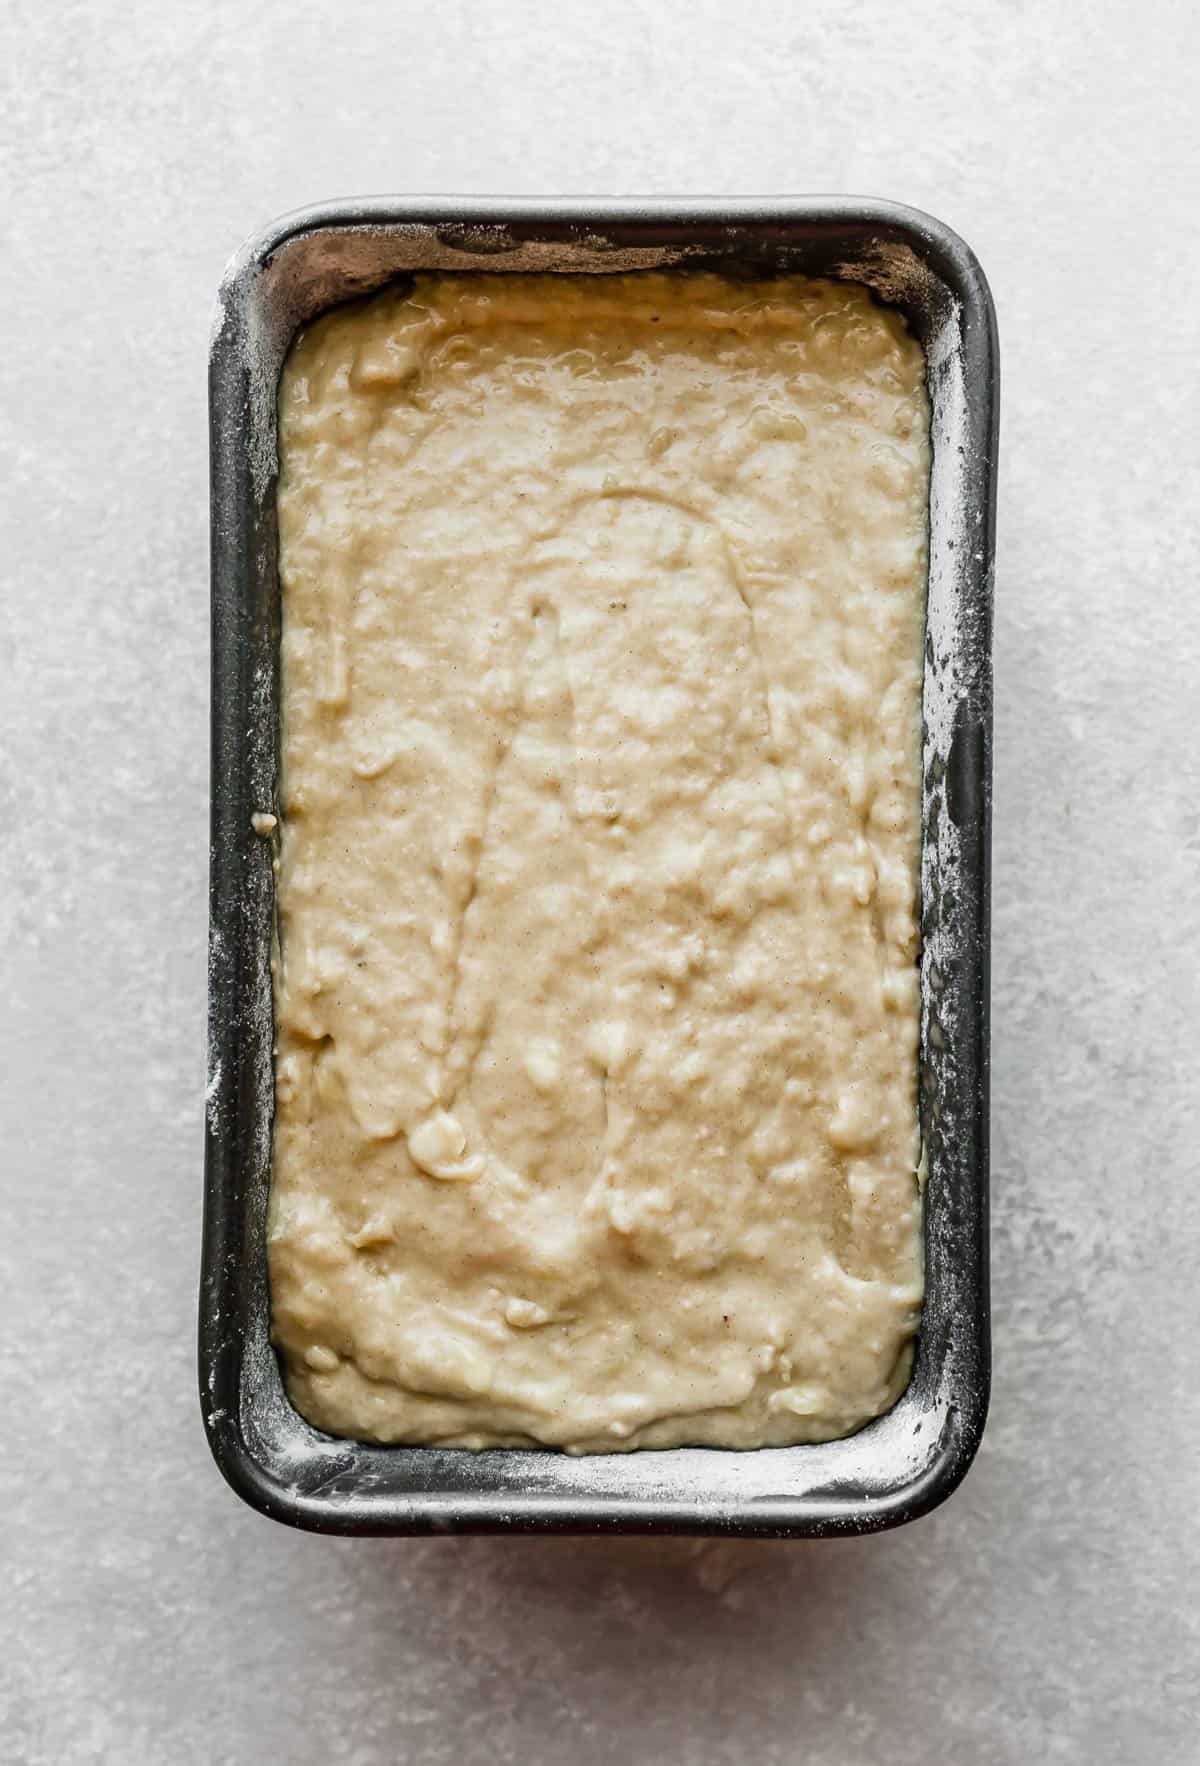 Banana bread batter in a grey bread pan on a light grey background.